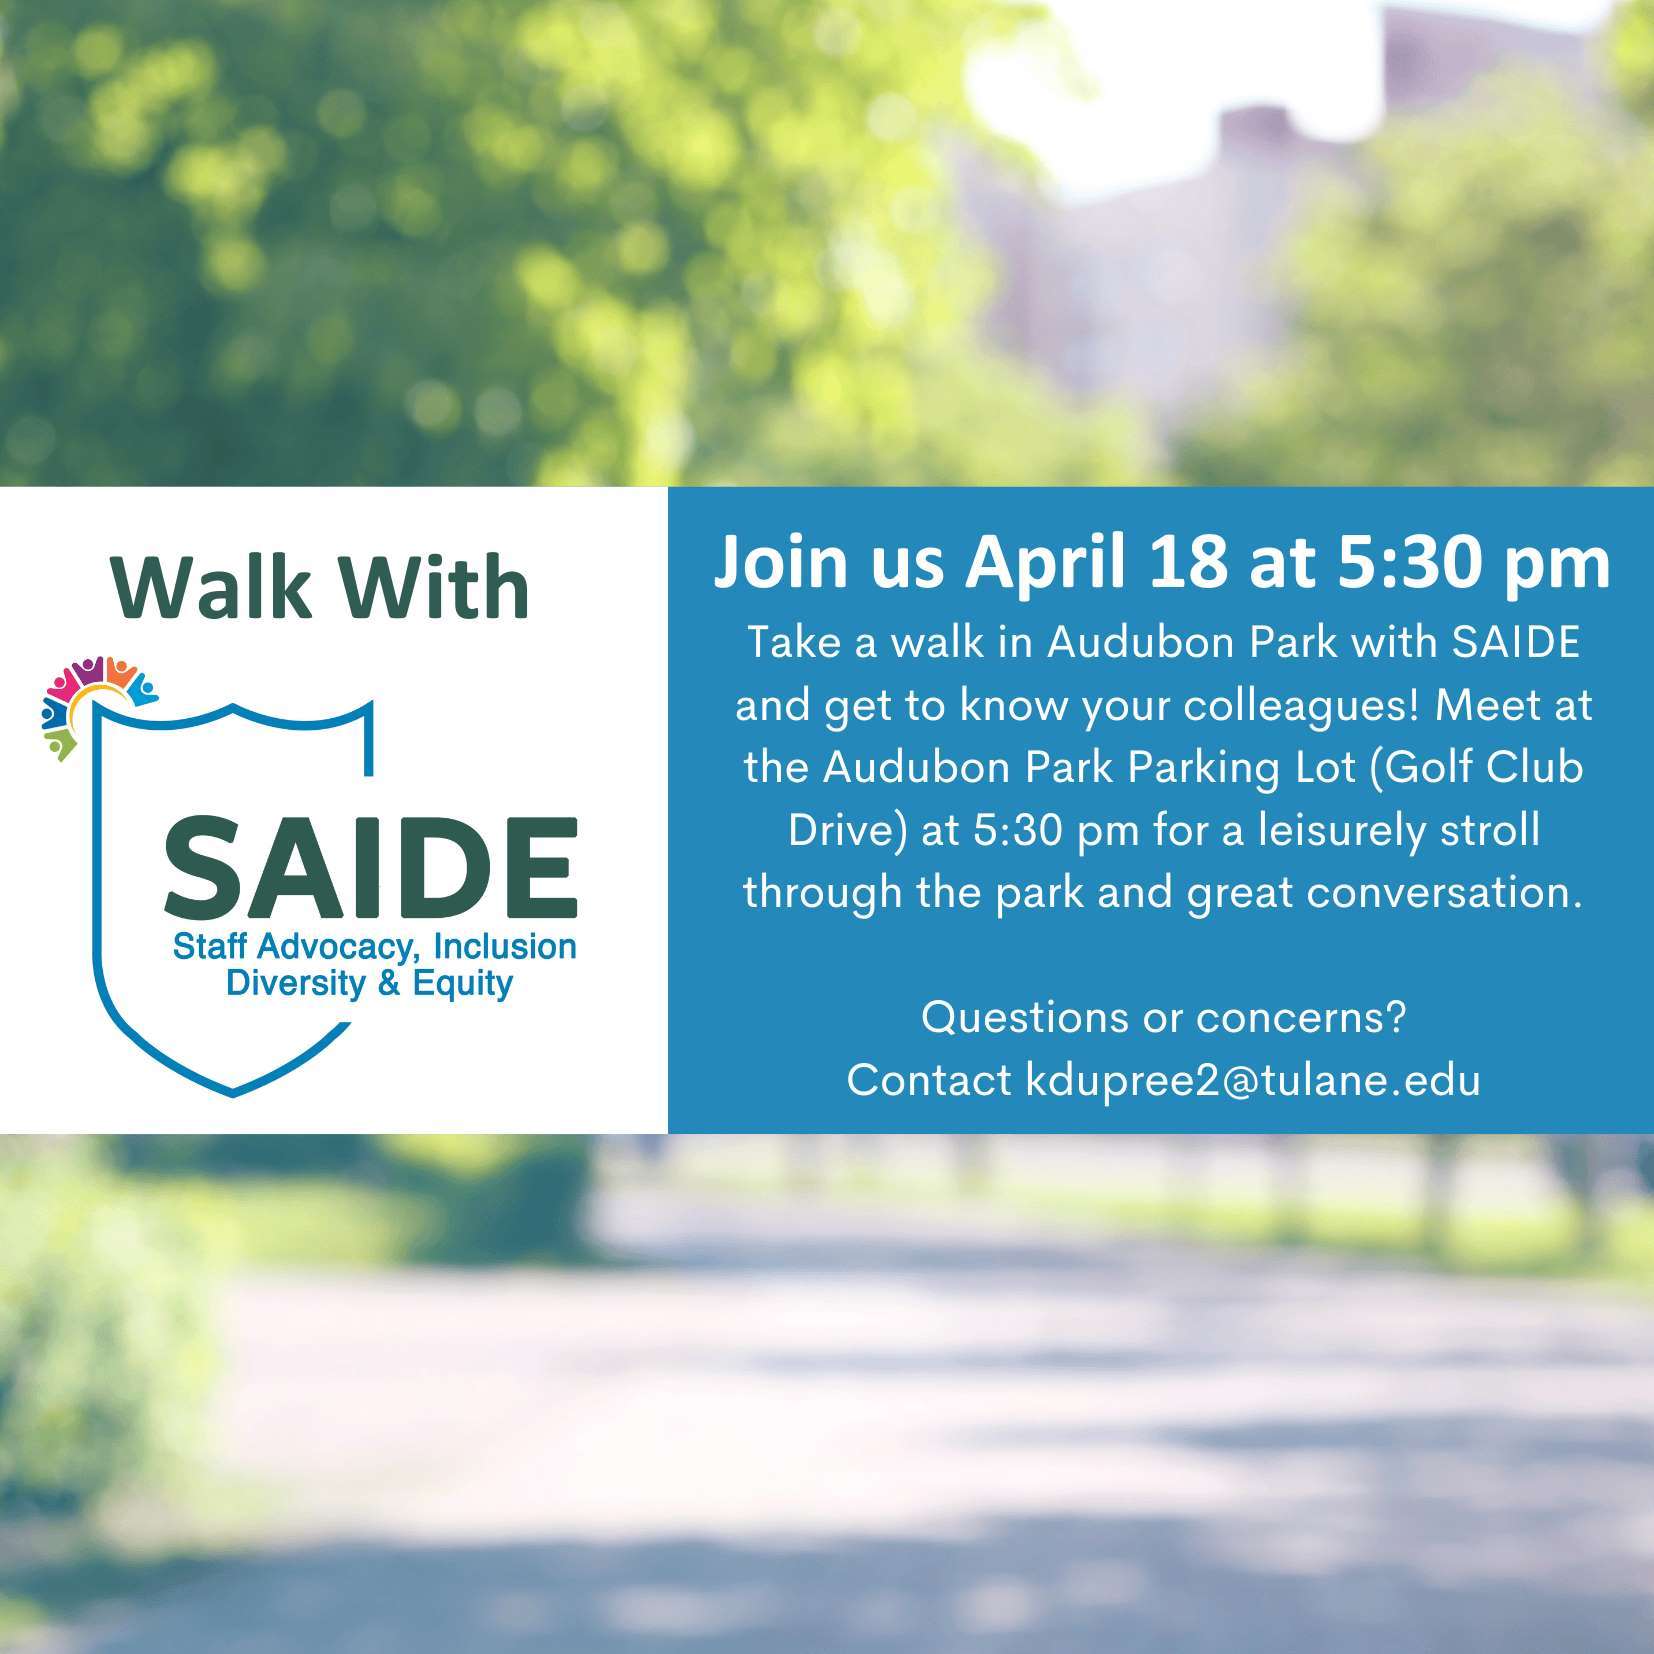 Walk with SAIDE in Audubon Park